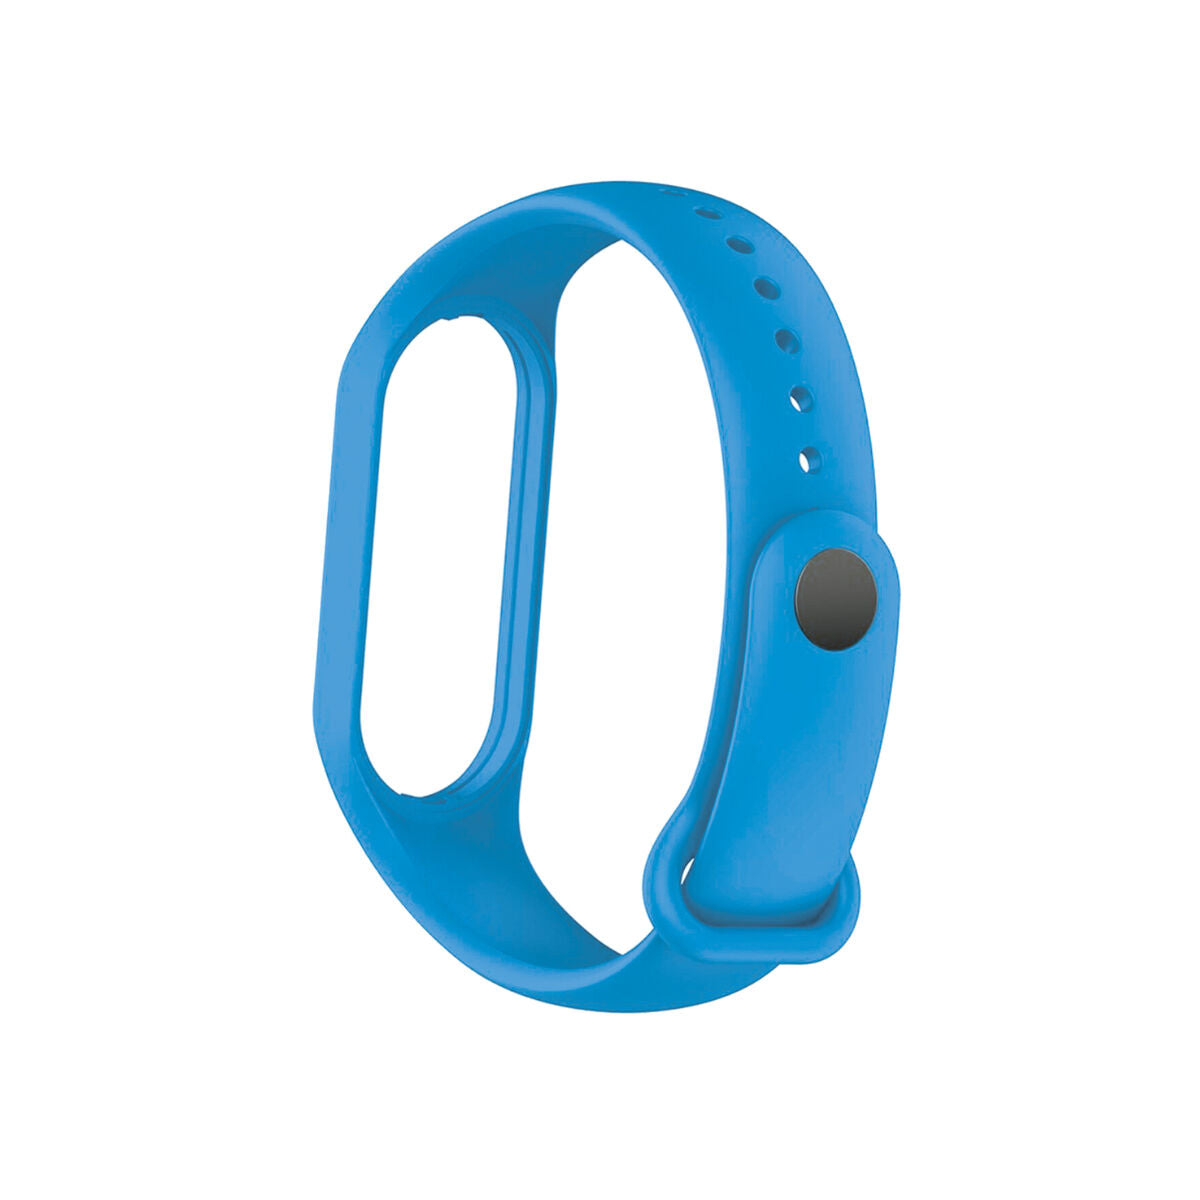 Watch Strap Contact Xiaomi Smart Band 7, Contact, Sports and outdoors, Electronics and devices, watch-strap-contact-xiaomi-smart-band-7, :Blue, Brand_Contact, category-reference-2609, category-reference-2617, category-reference-2634, category-reference-t-19756, category-reference-t-7034, category-reference-t-7035, Condition_NEW, deportista / en forma, original gifts, Price_20 - 50, telephones & tablets, vida sana, RiotNook